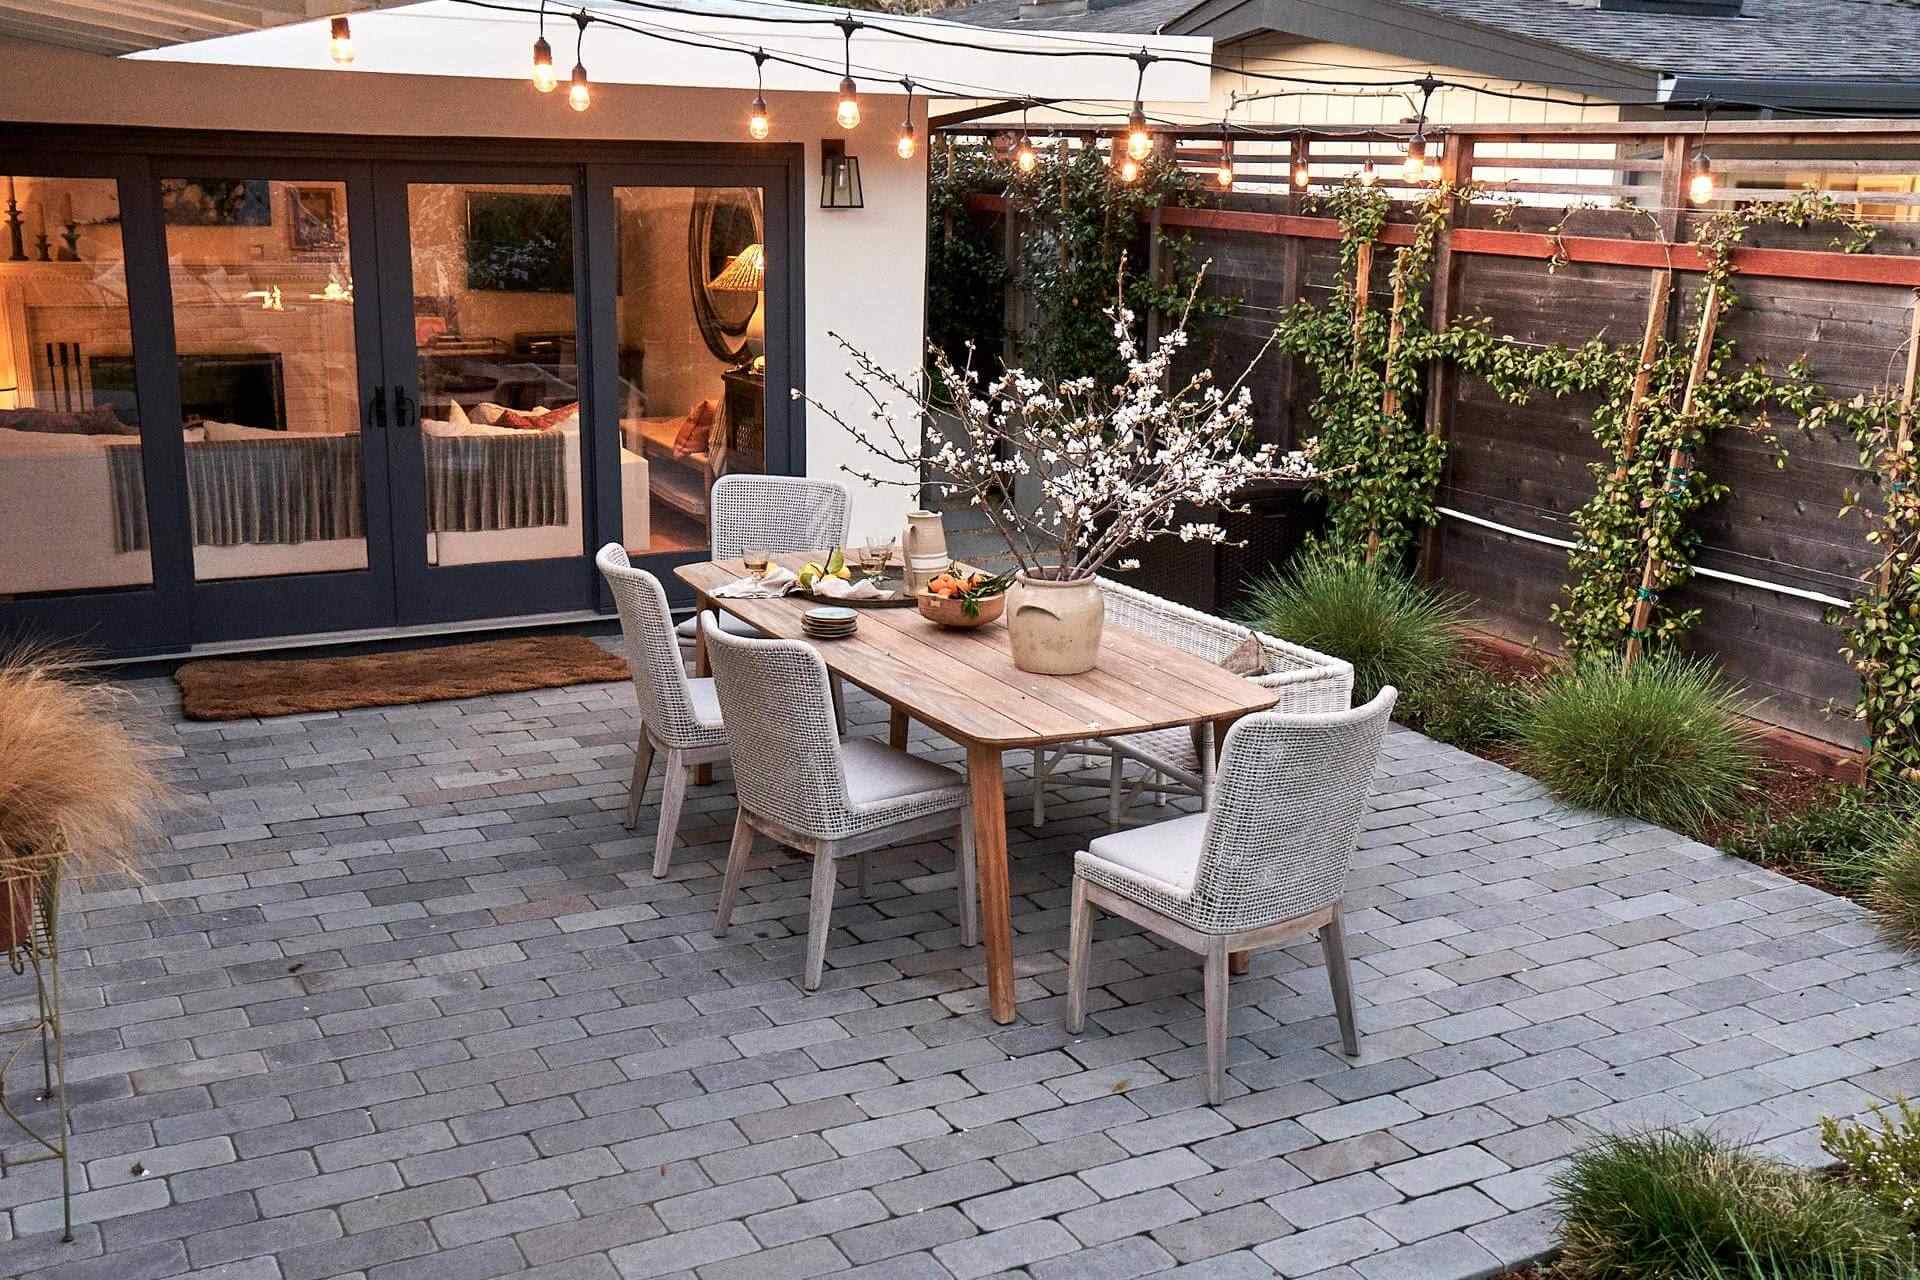 How To Pave A Backyard